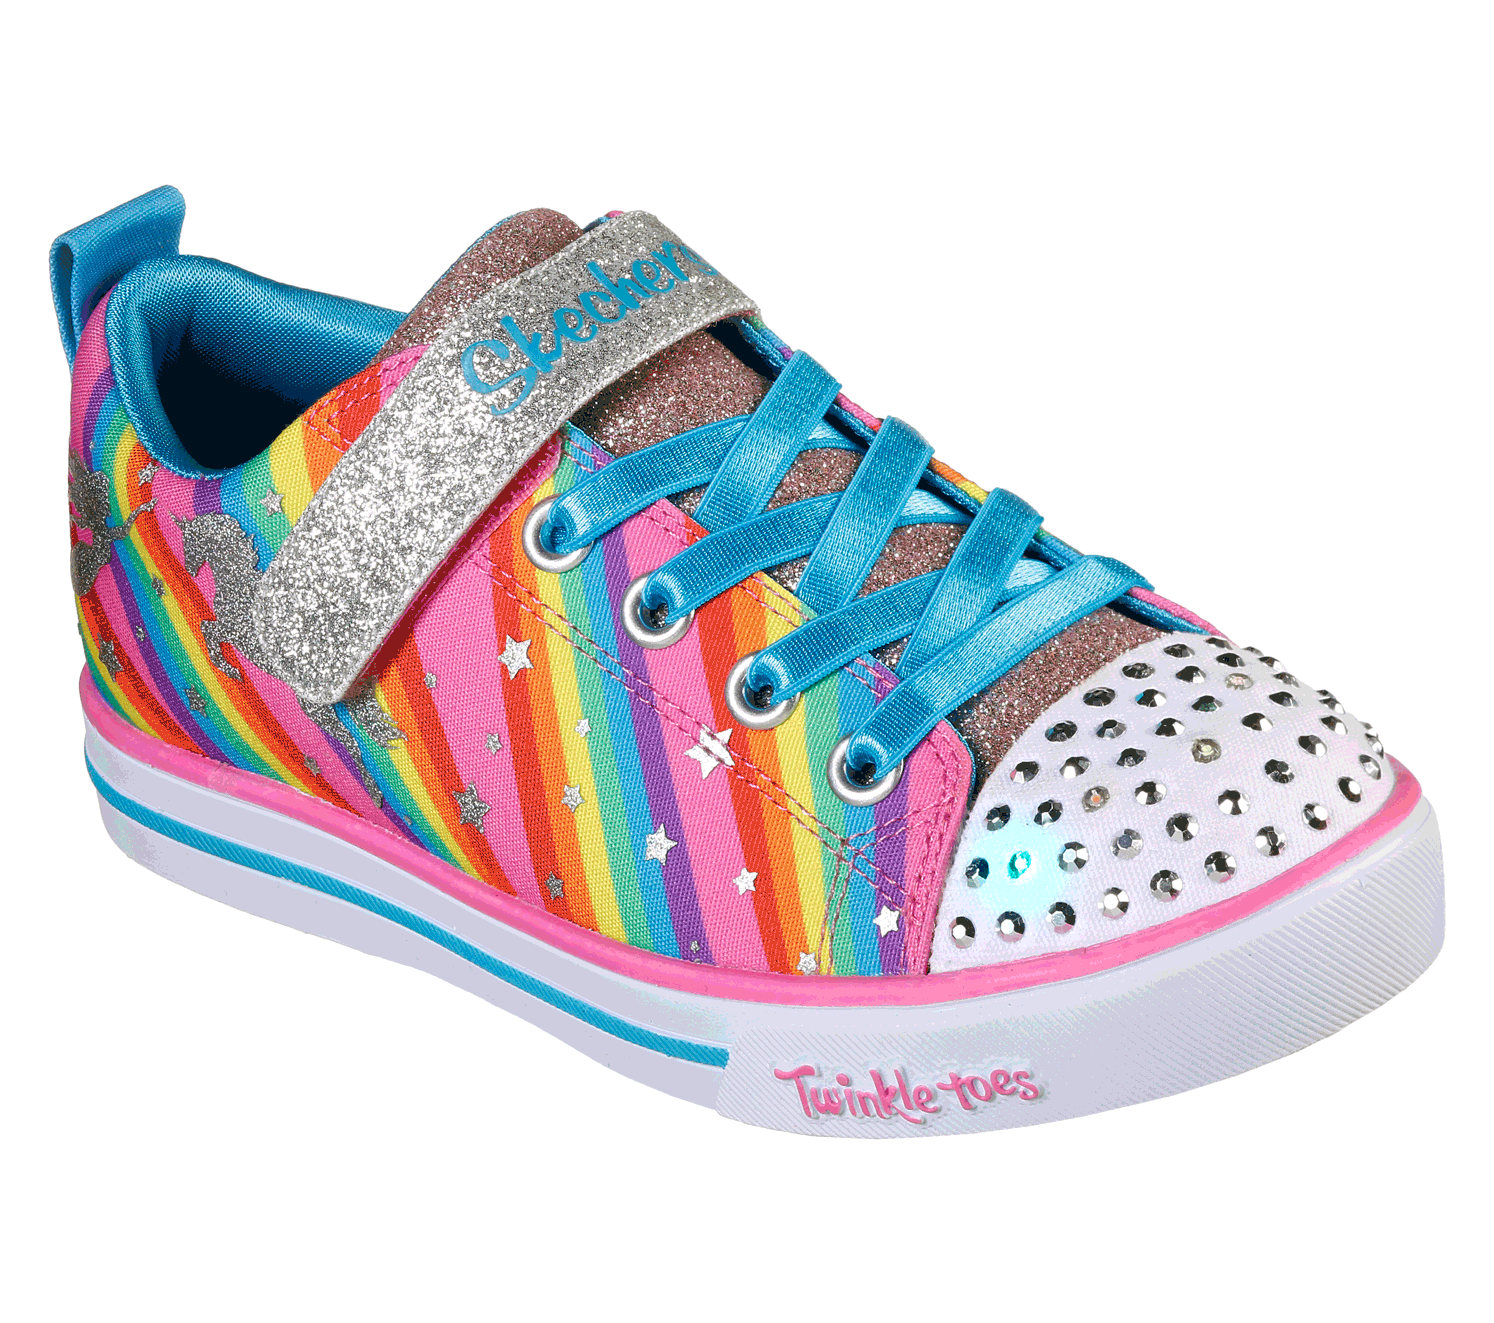 Shop the Twinkle Toes: Sparkle Lite 